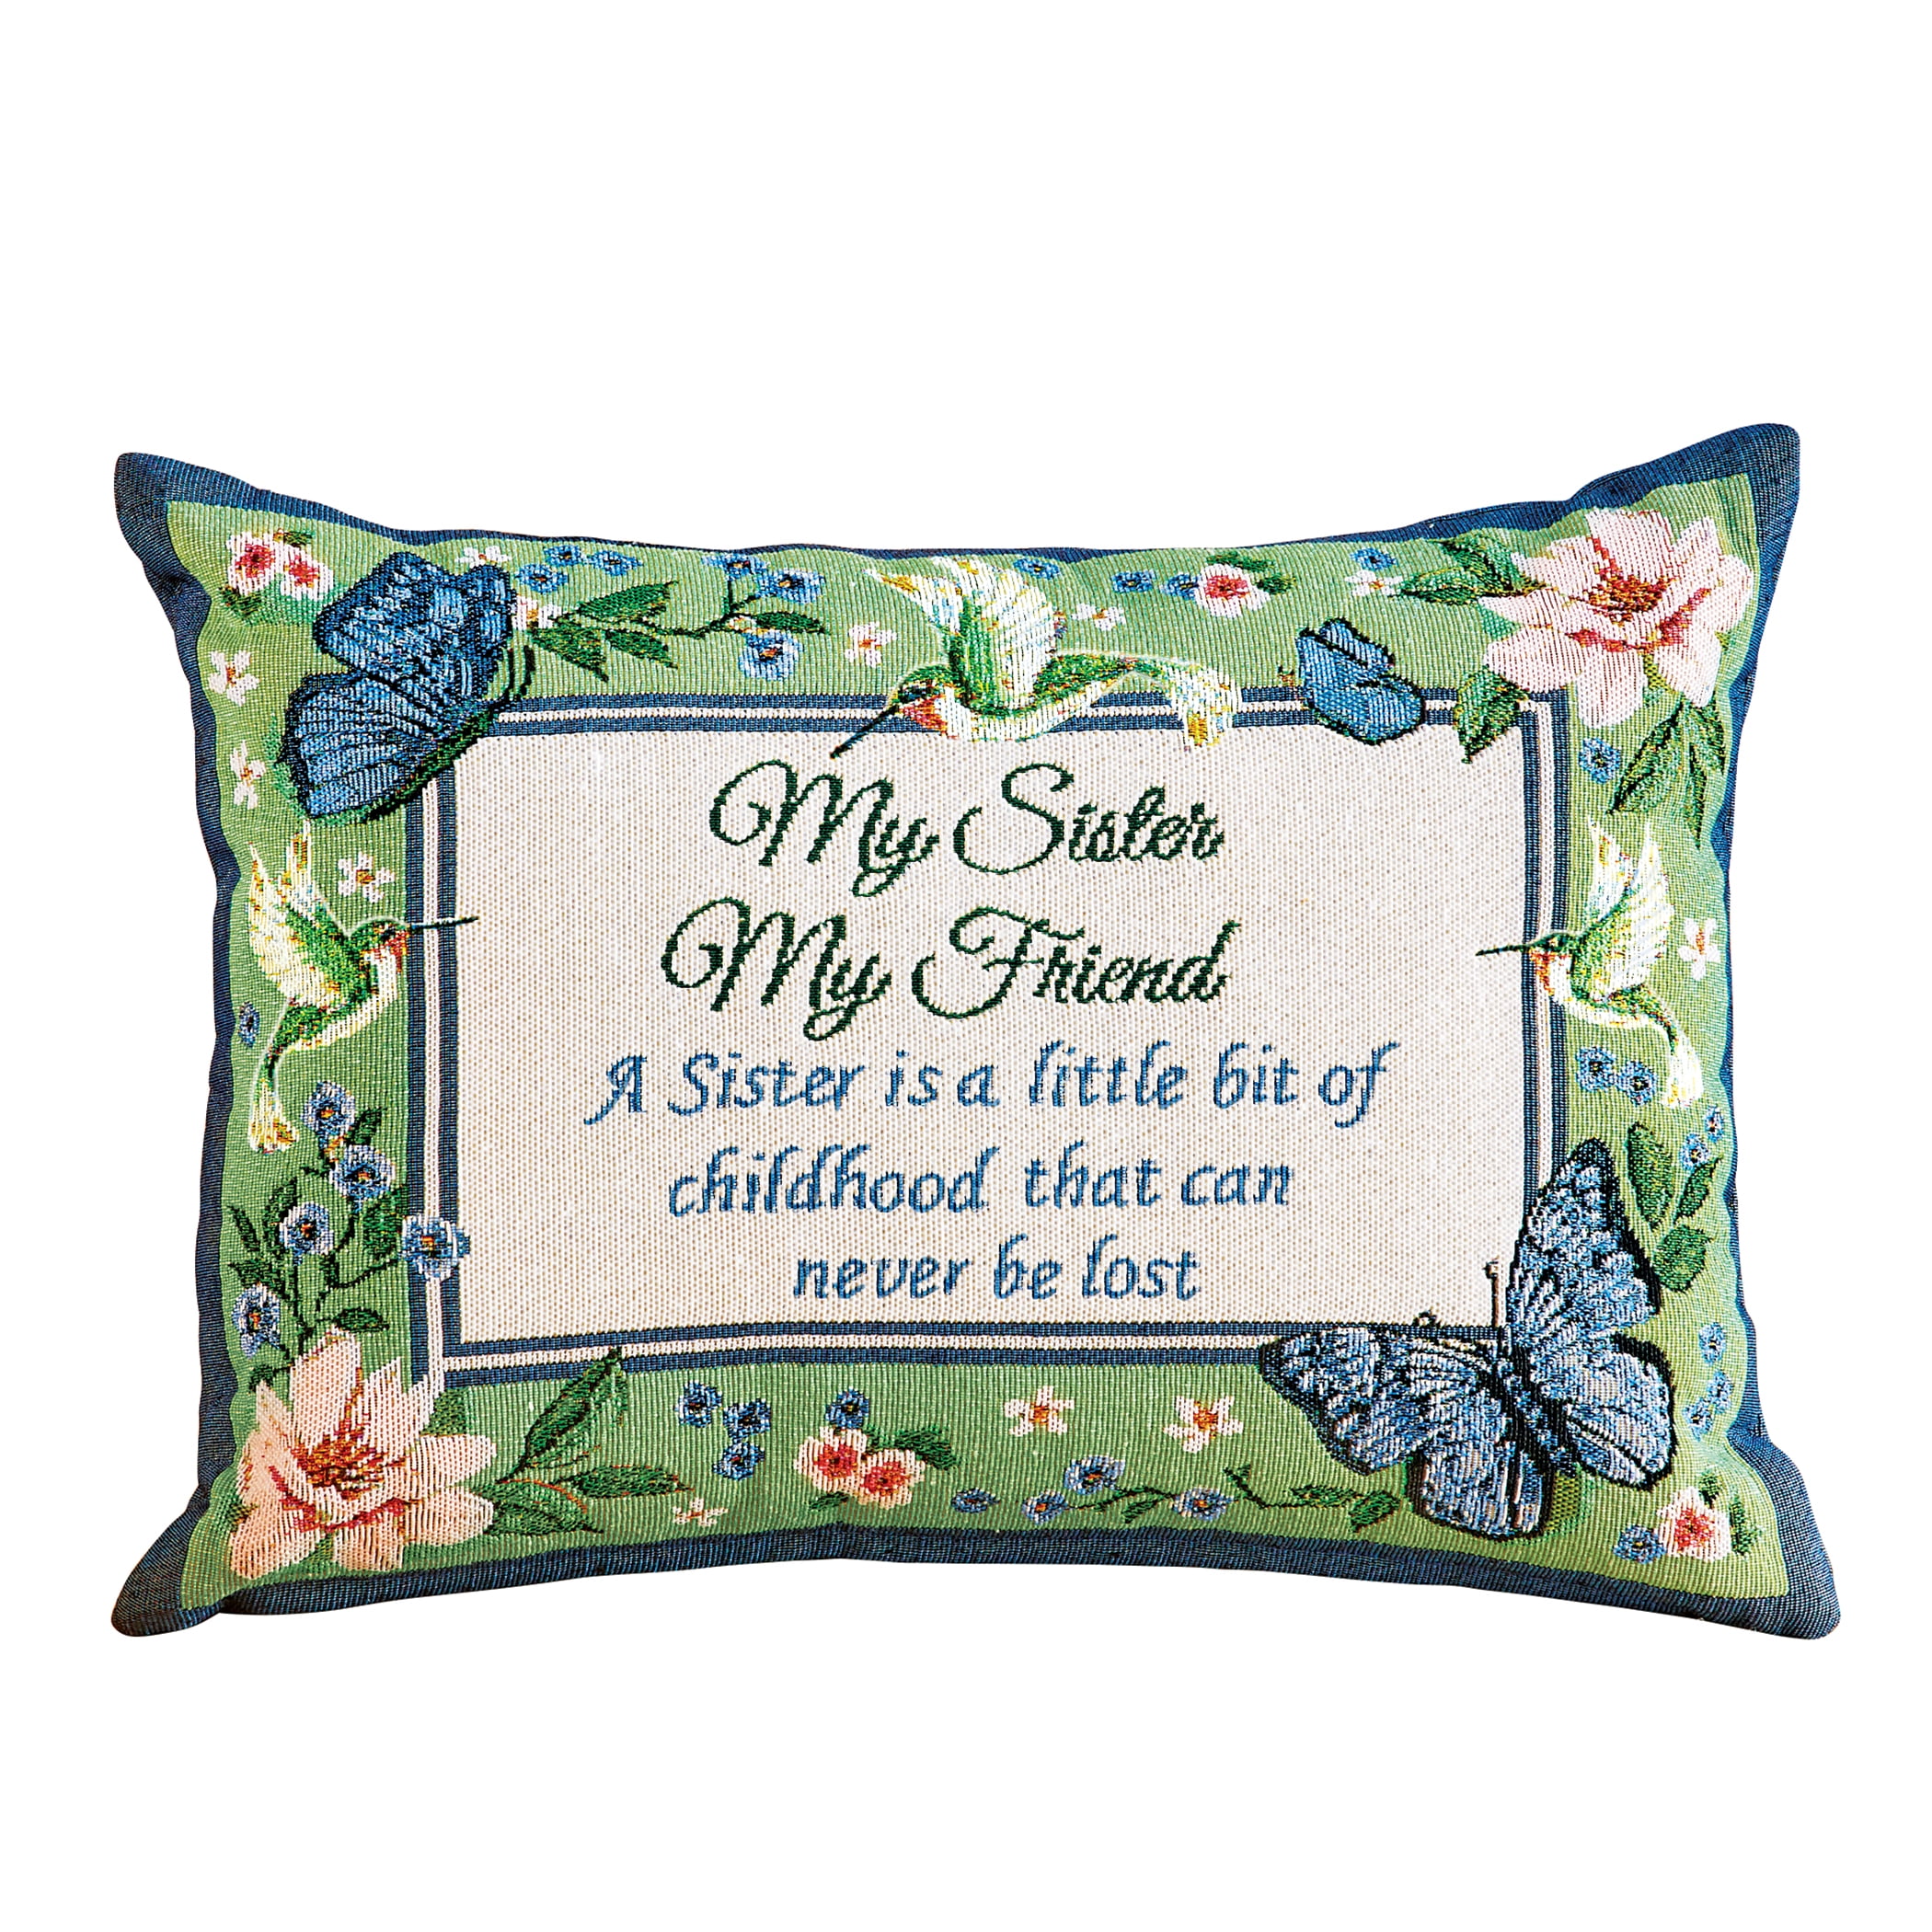 Custom Pillow, Personalized Photo Pillows with Insert - 13X13 Inches with  Duplex Print Image/Text - Unique Gift for